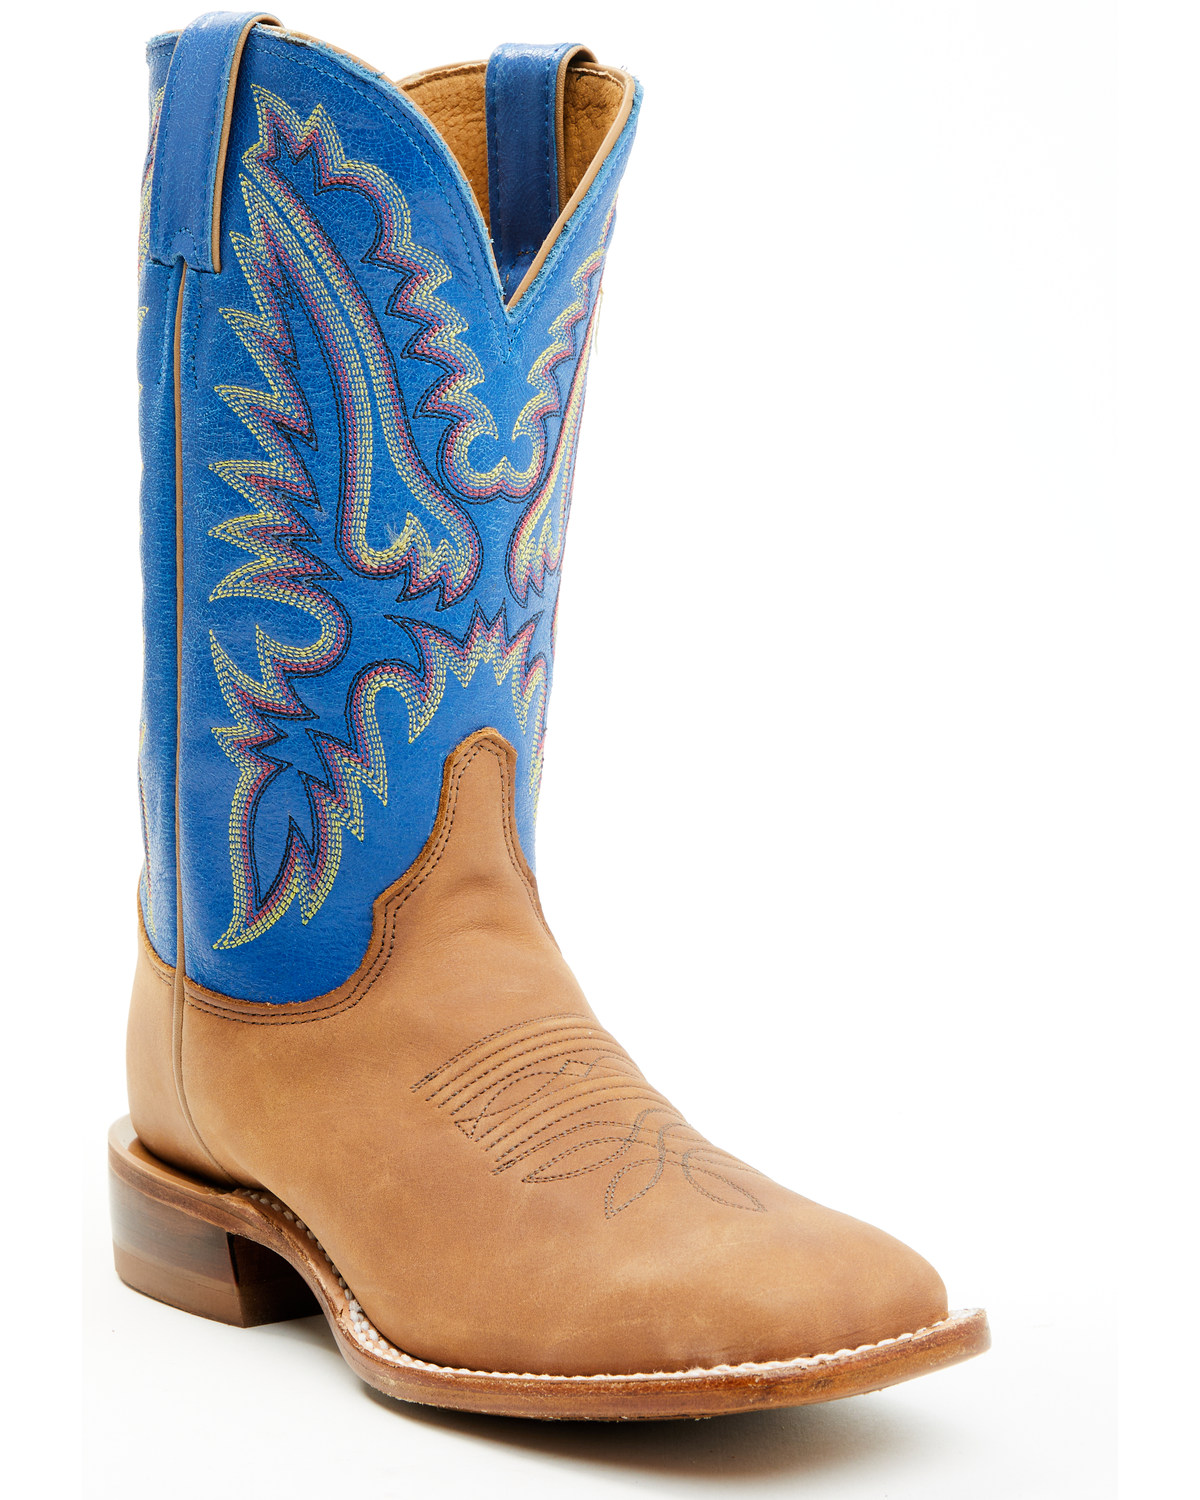 Justin Women's Peyton Western Boots - Broad Square Toe